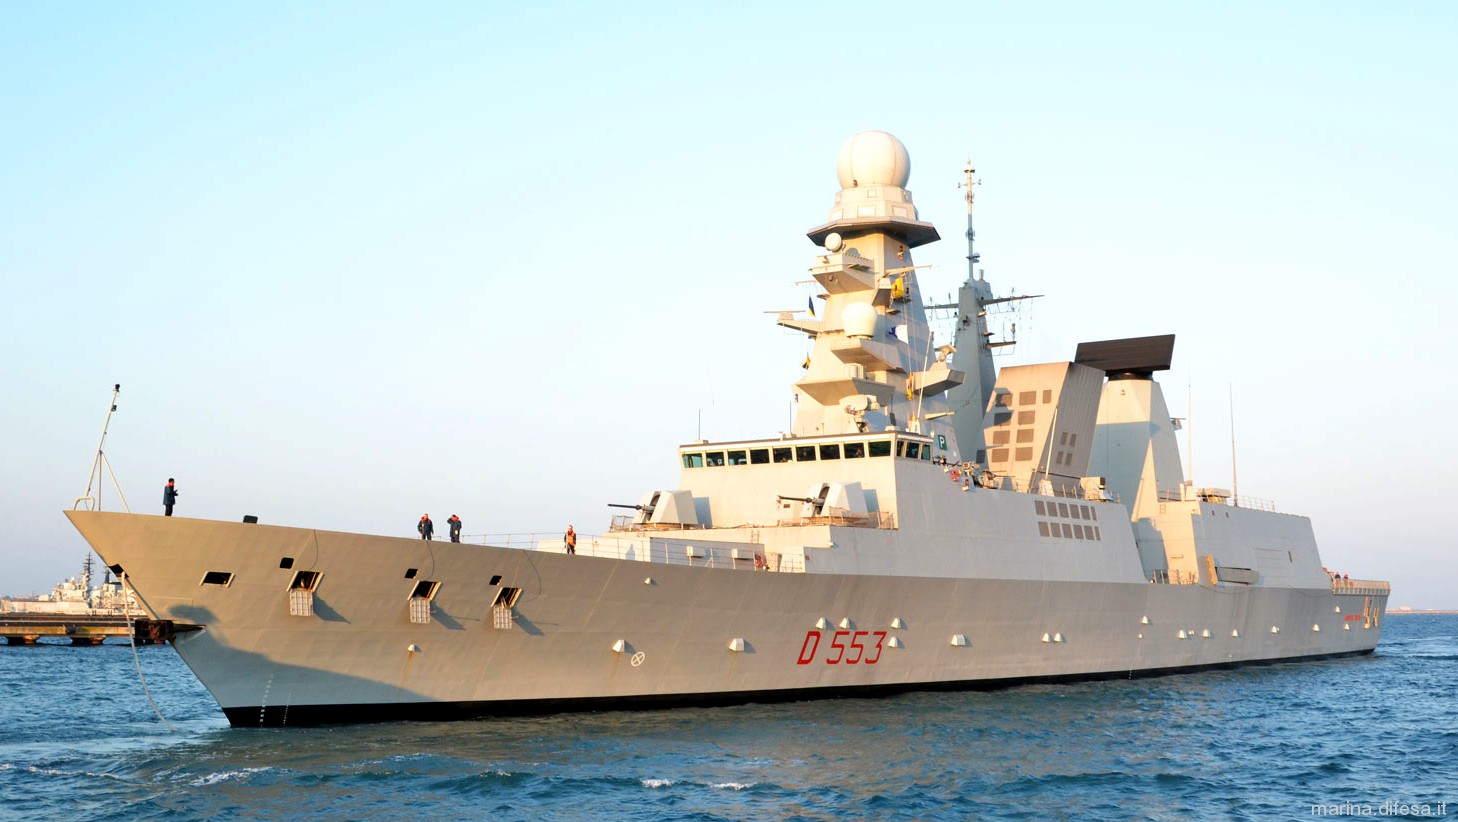 d-553 its andrea doria guided missile destroyer ddgh horizon class italian navy 27